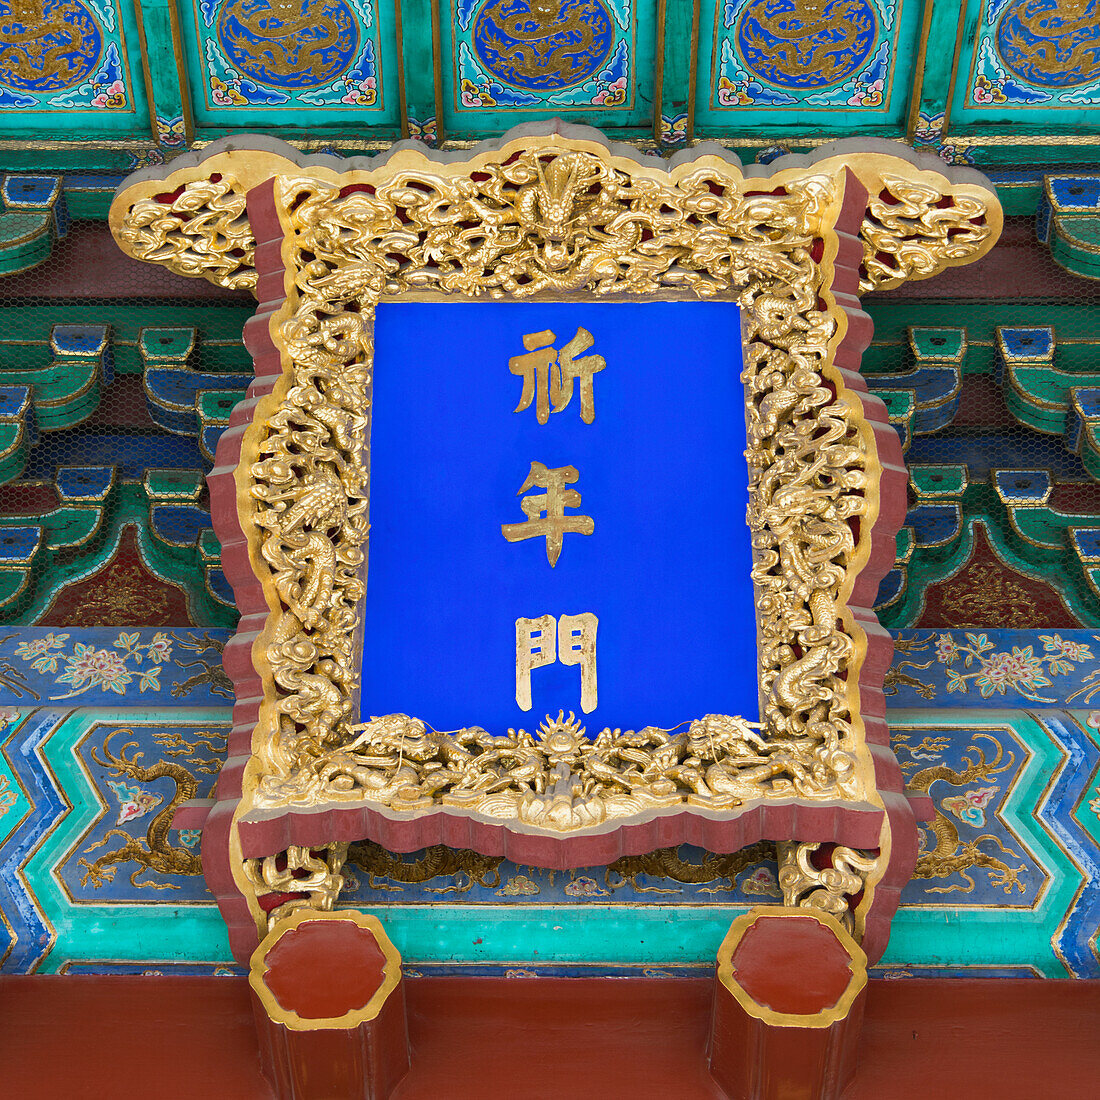 Gold And Colourful Decorative Piece On The Wall At Temple Of Heaven; Beijing, China